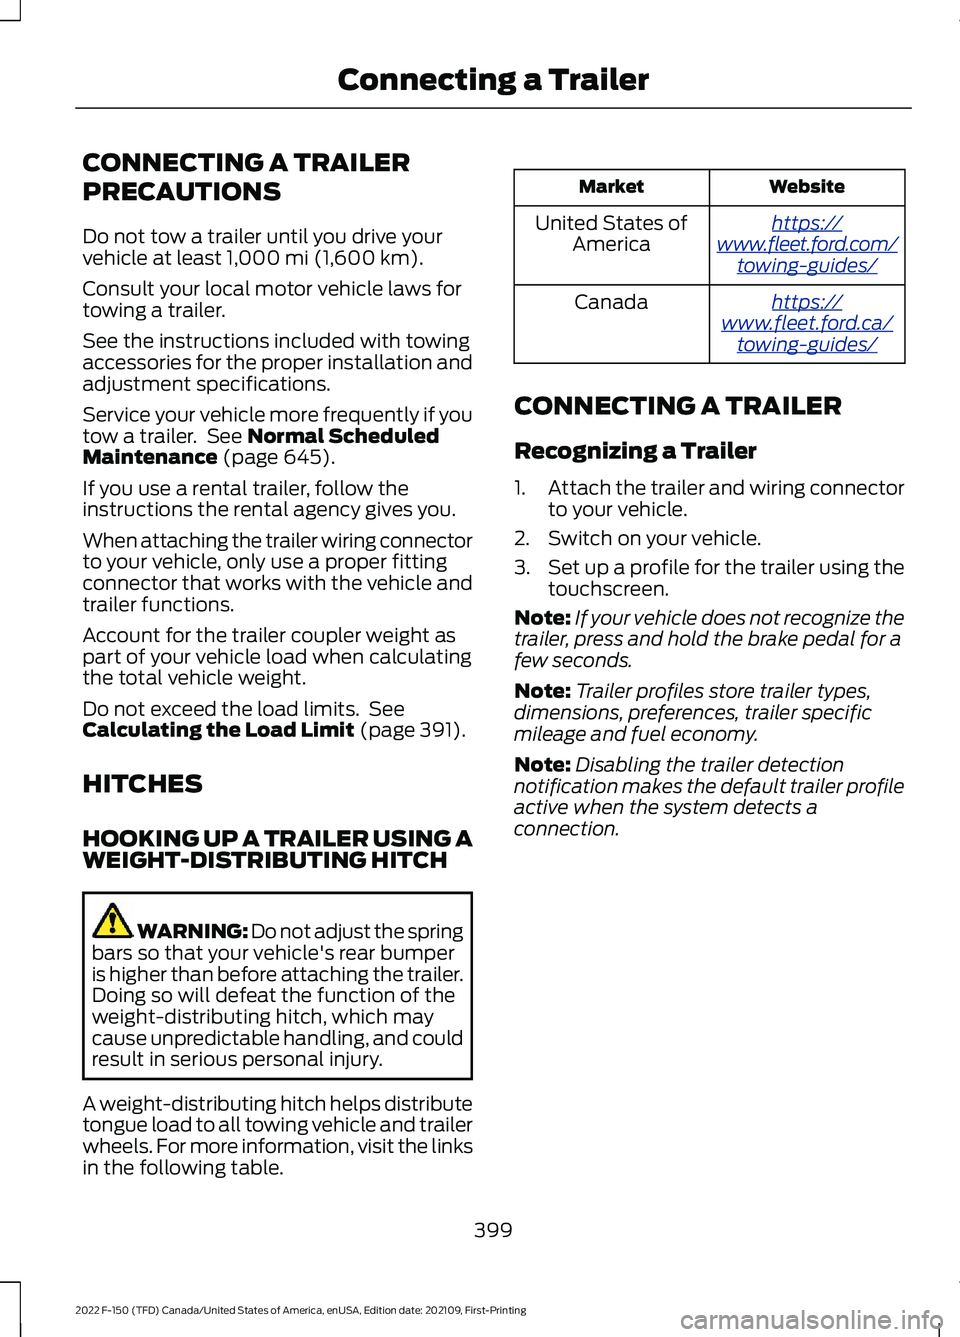 FORD F-150 2022  Owners Manual CONNECTING A TRAILER
PRECAUTIONS
Do not tow a trailer until you drive your
vehicle at least 1,000 mi (1,600 km).
Consult your local motor vehicle laws for
towing a trailer.
See the instructions includ